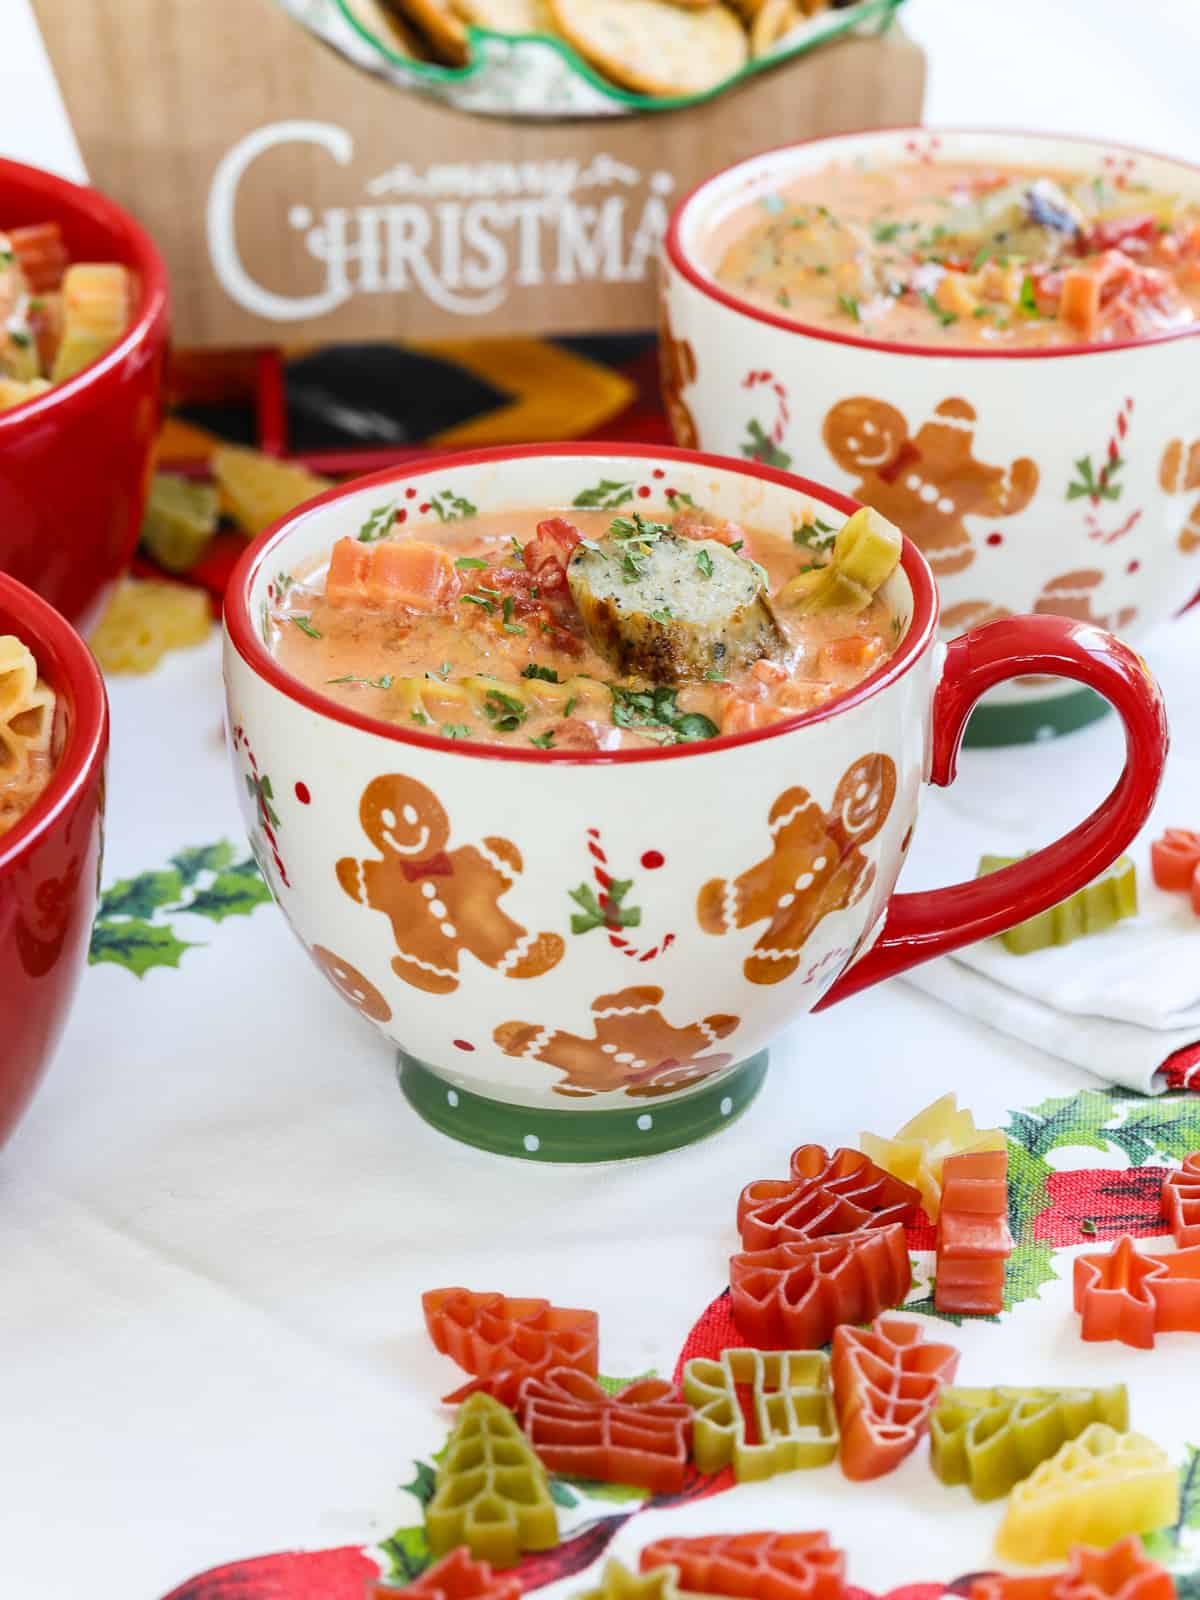 https://www.delicioustable.com/wp-content/uploads/2022/12/Christmas-Soup-with-sausage-on-top.jpg